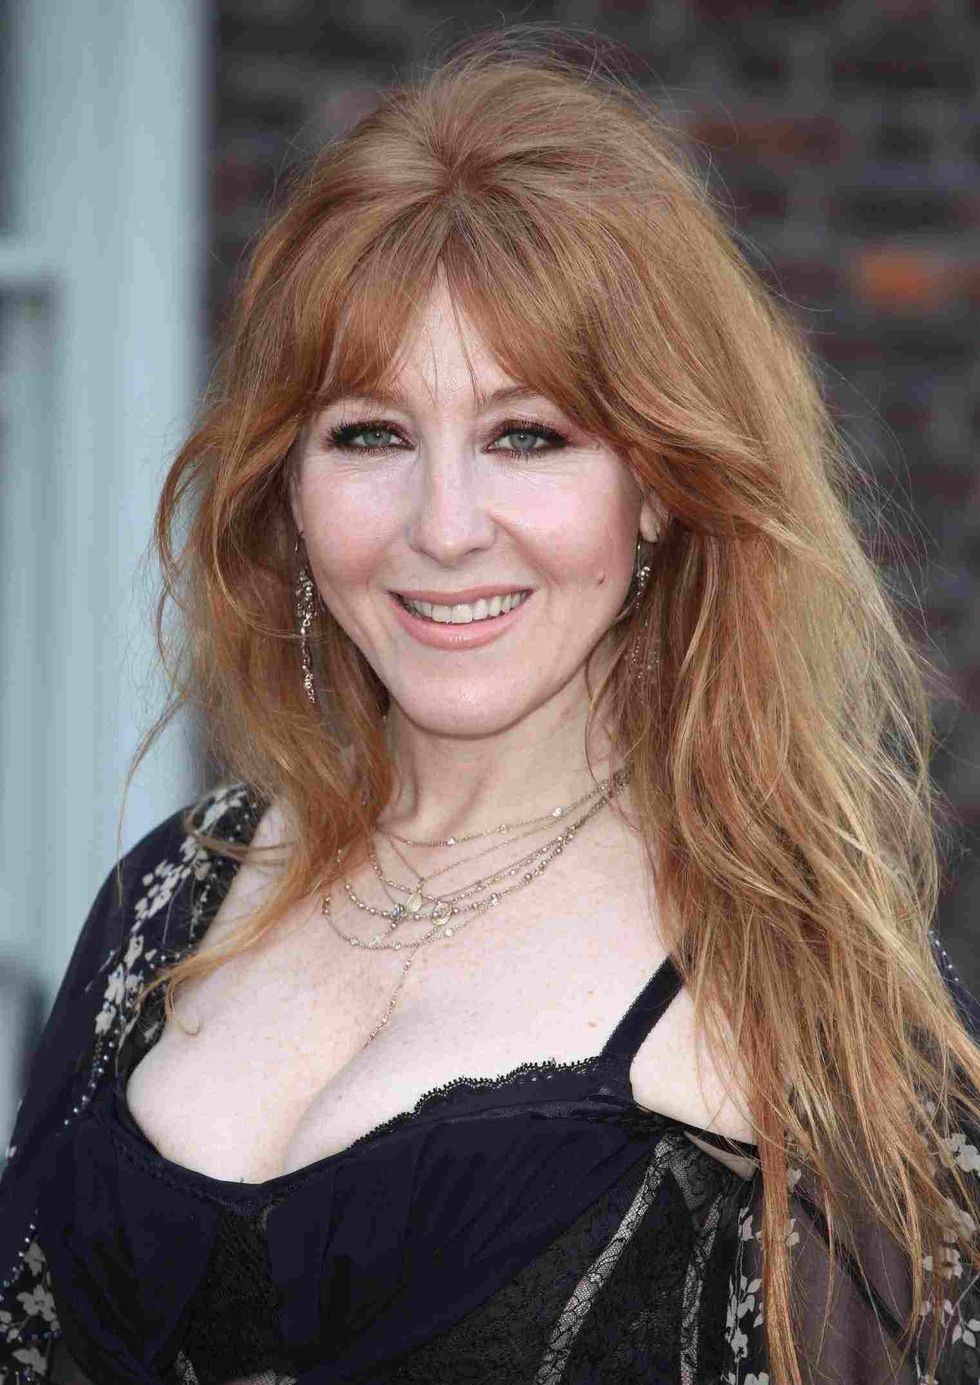 Interesting facts about Charlotte Tilbury, her birthday, and net worth reveal that she is a well-known makeup artist.